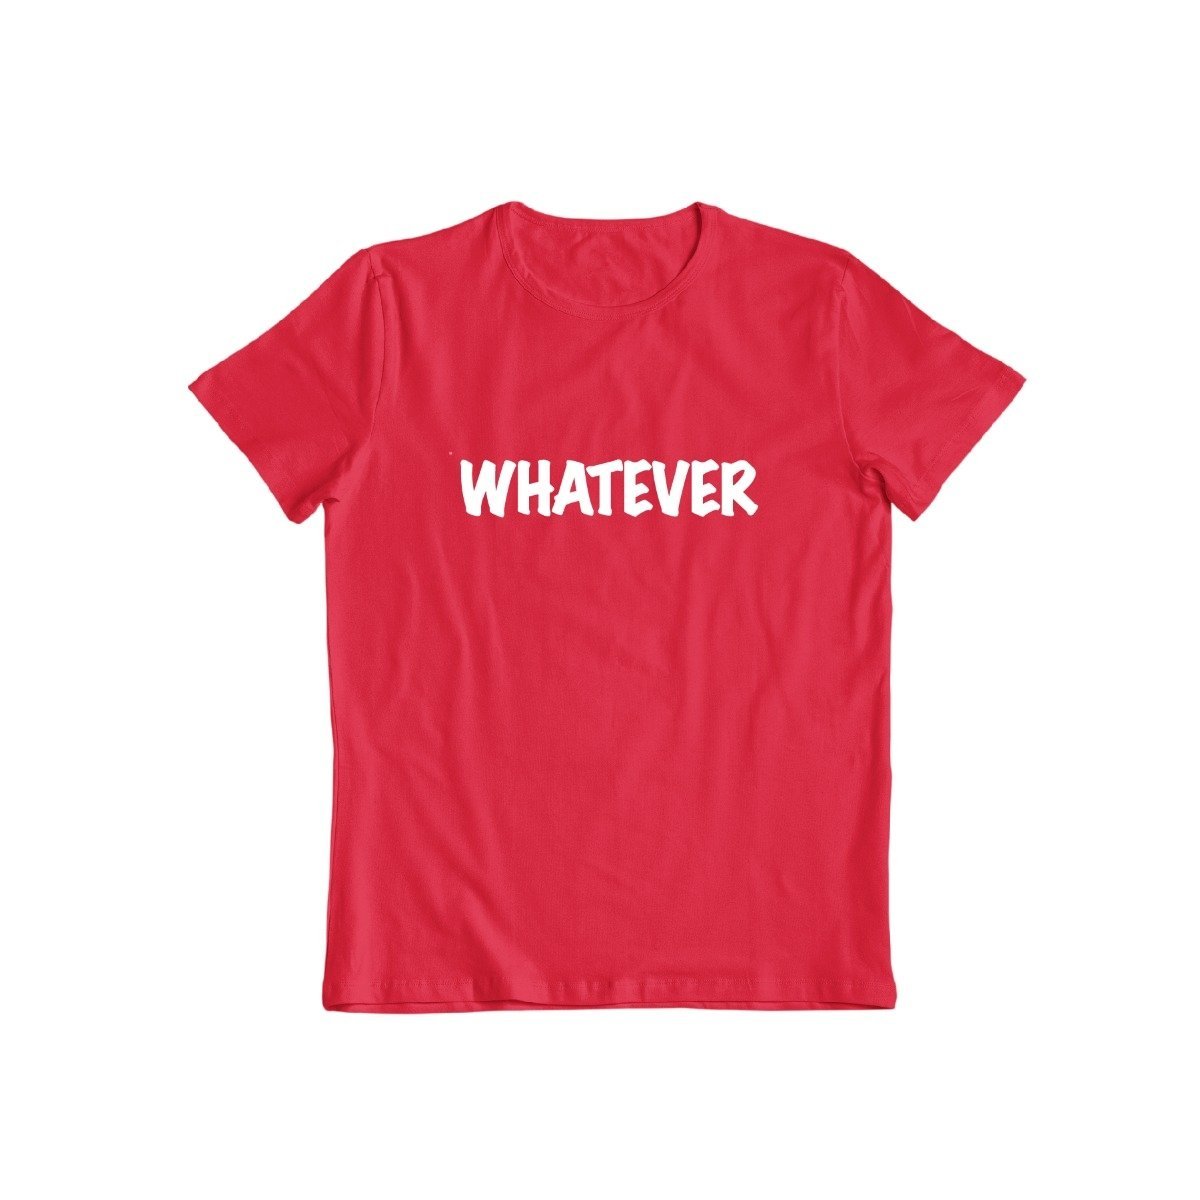 Whatever T-Shirt for Men and Women / Red / XL